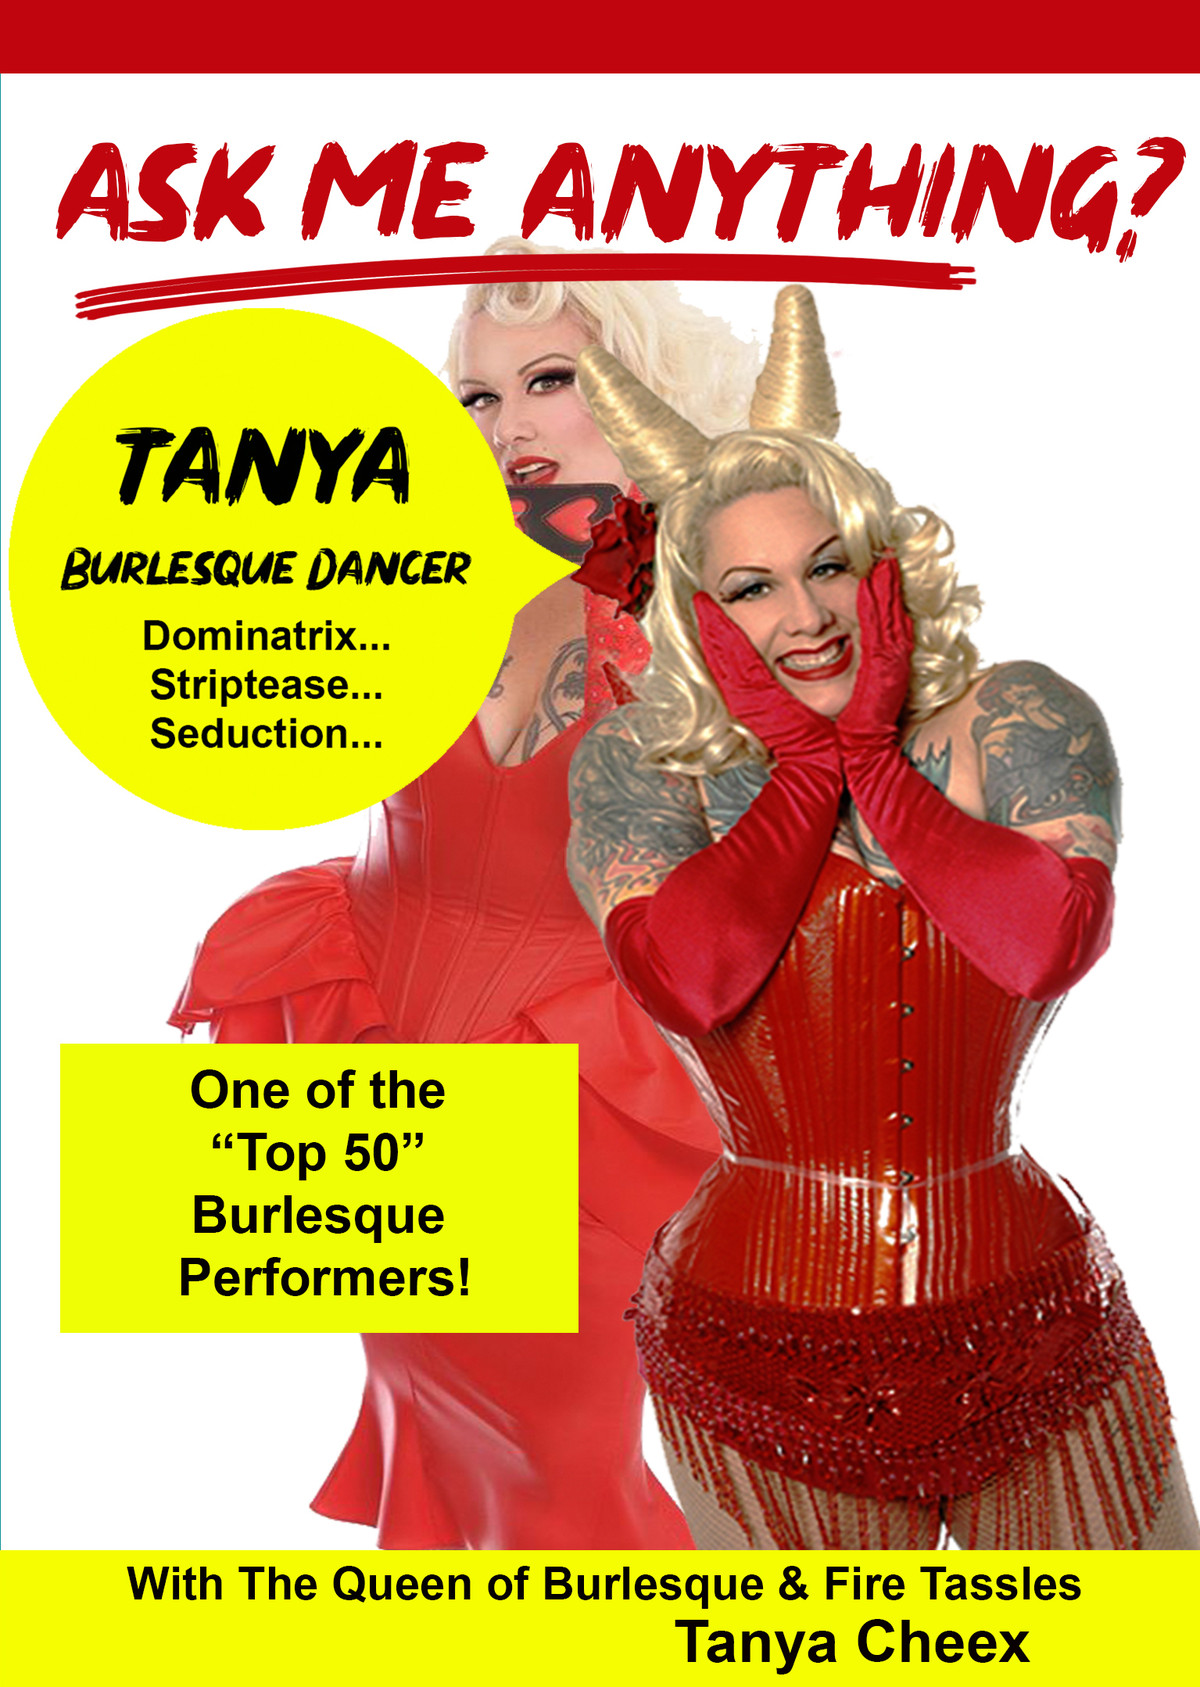 K4839 - Ask Me Anything about being a Burlesque Dancer with The Queen of Burlesque Tanya Cheex